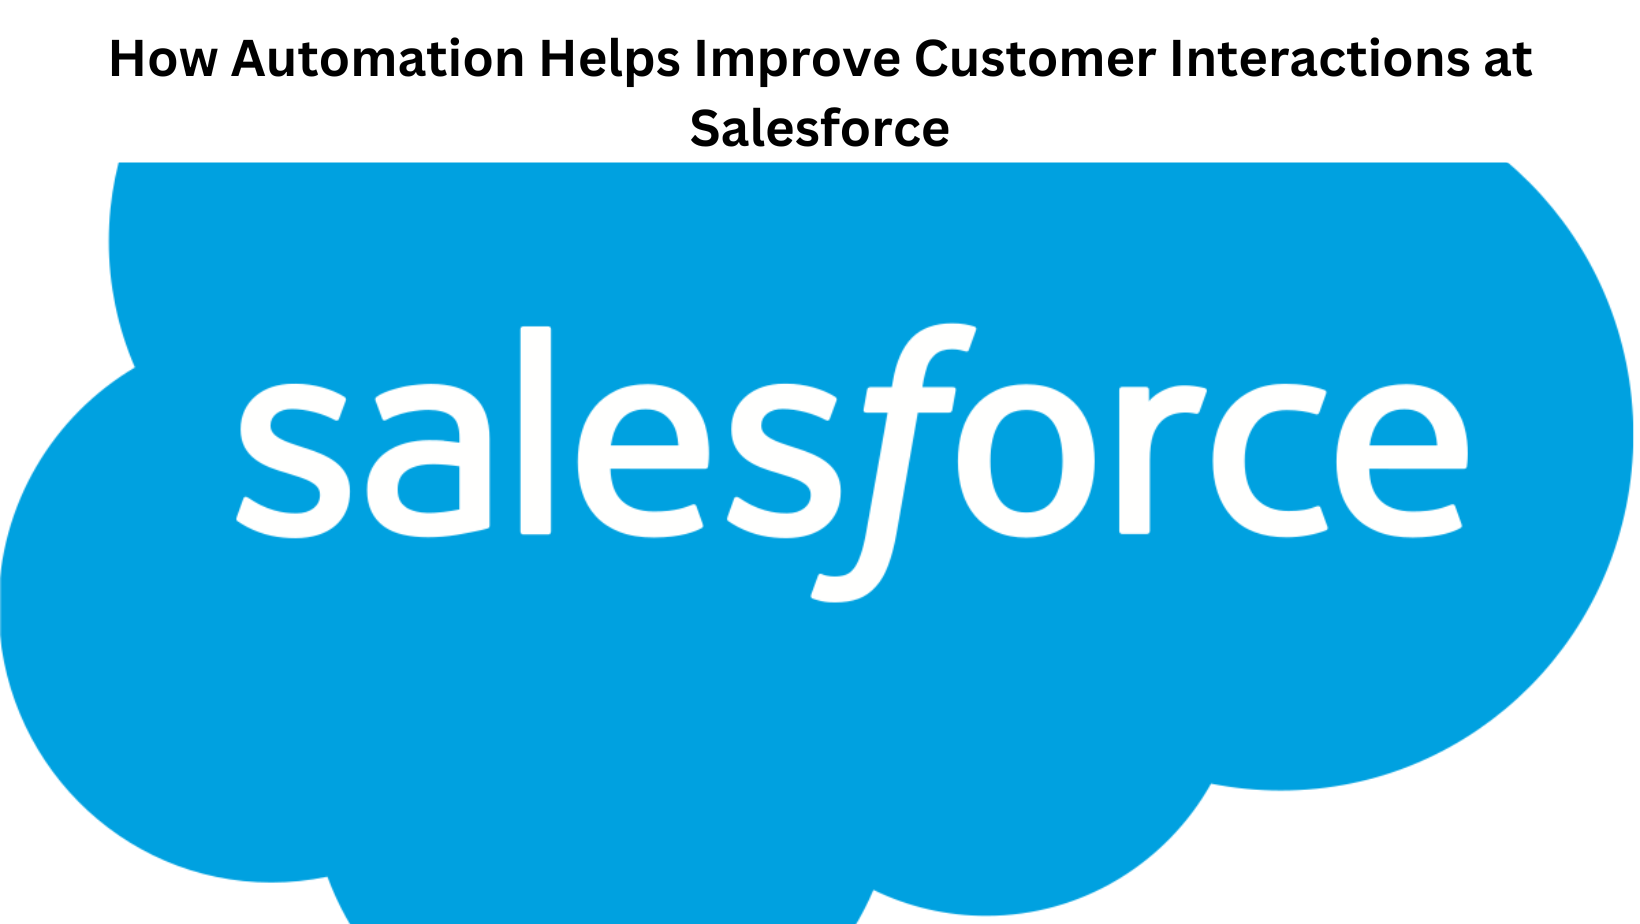 How Automation Helps Improve Customer Interactions at Salesforce